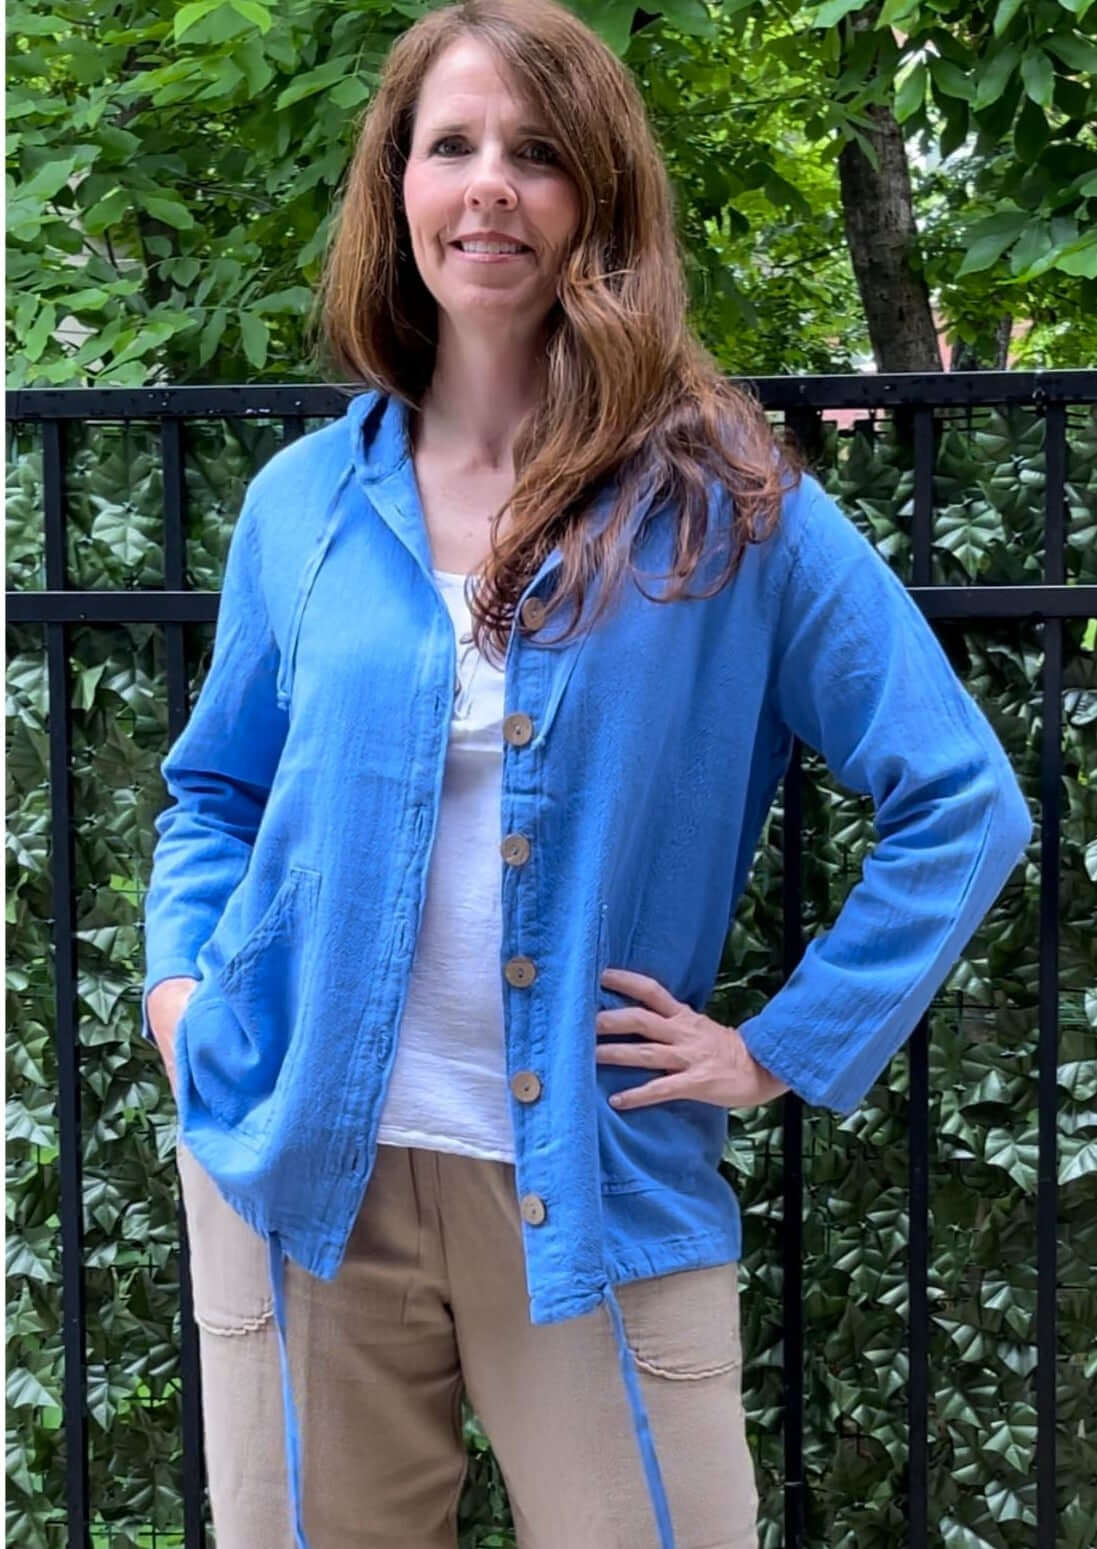 Made in USA Women's 100% Cotton Lightweight Button Down Beach Hoodie with Pockets in Blue | Classy Cozy Cool Women's Made in America Boutique